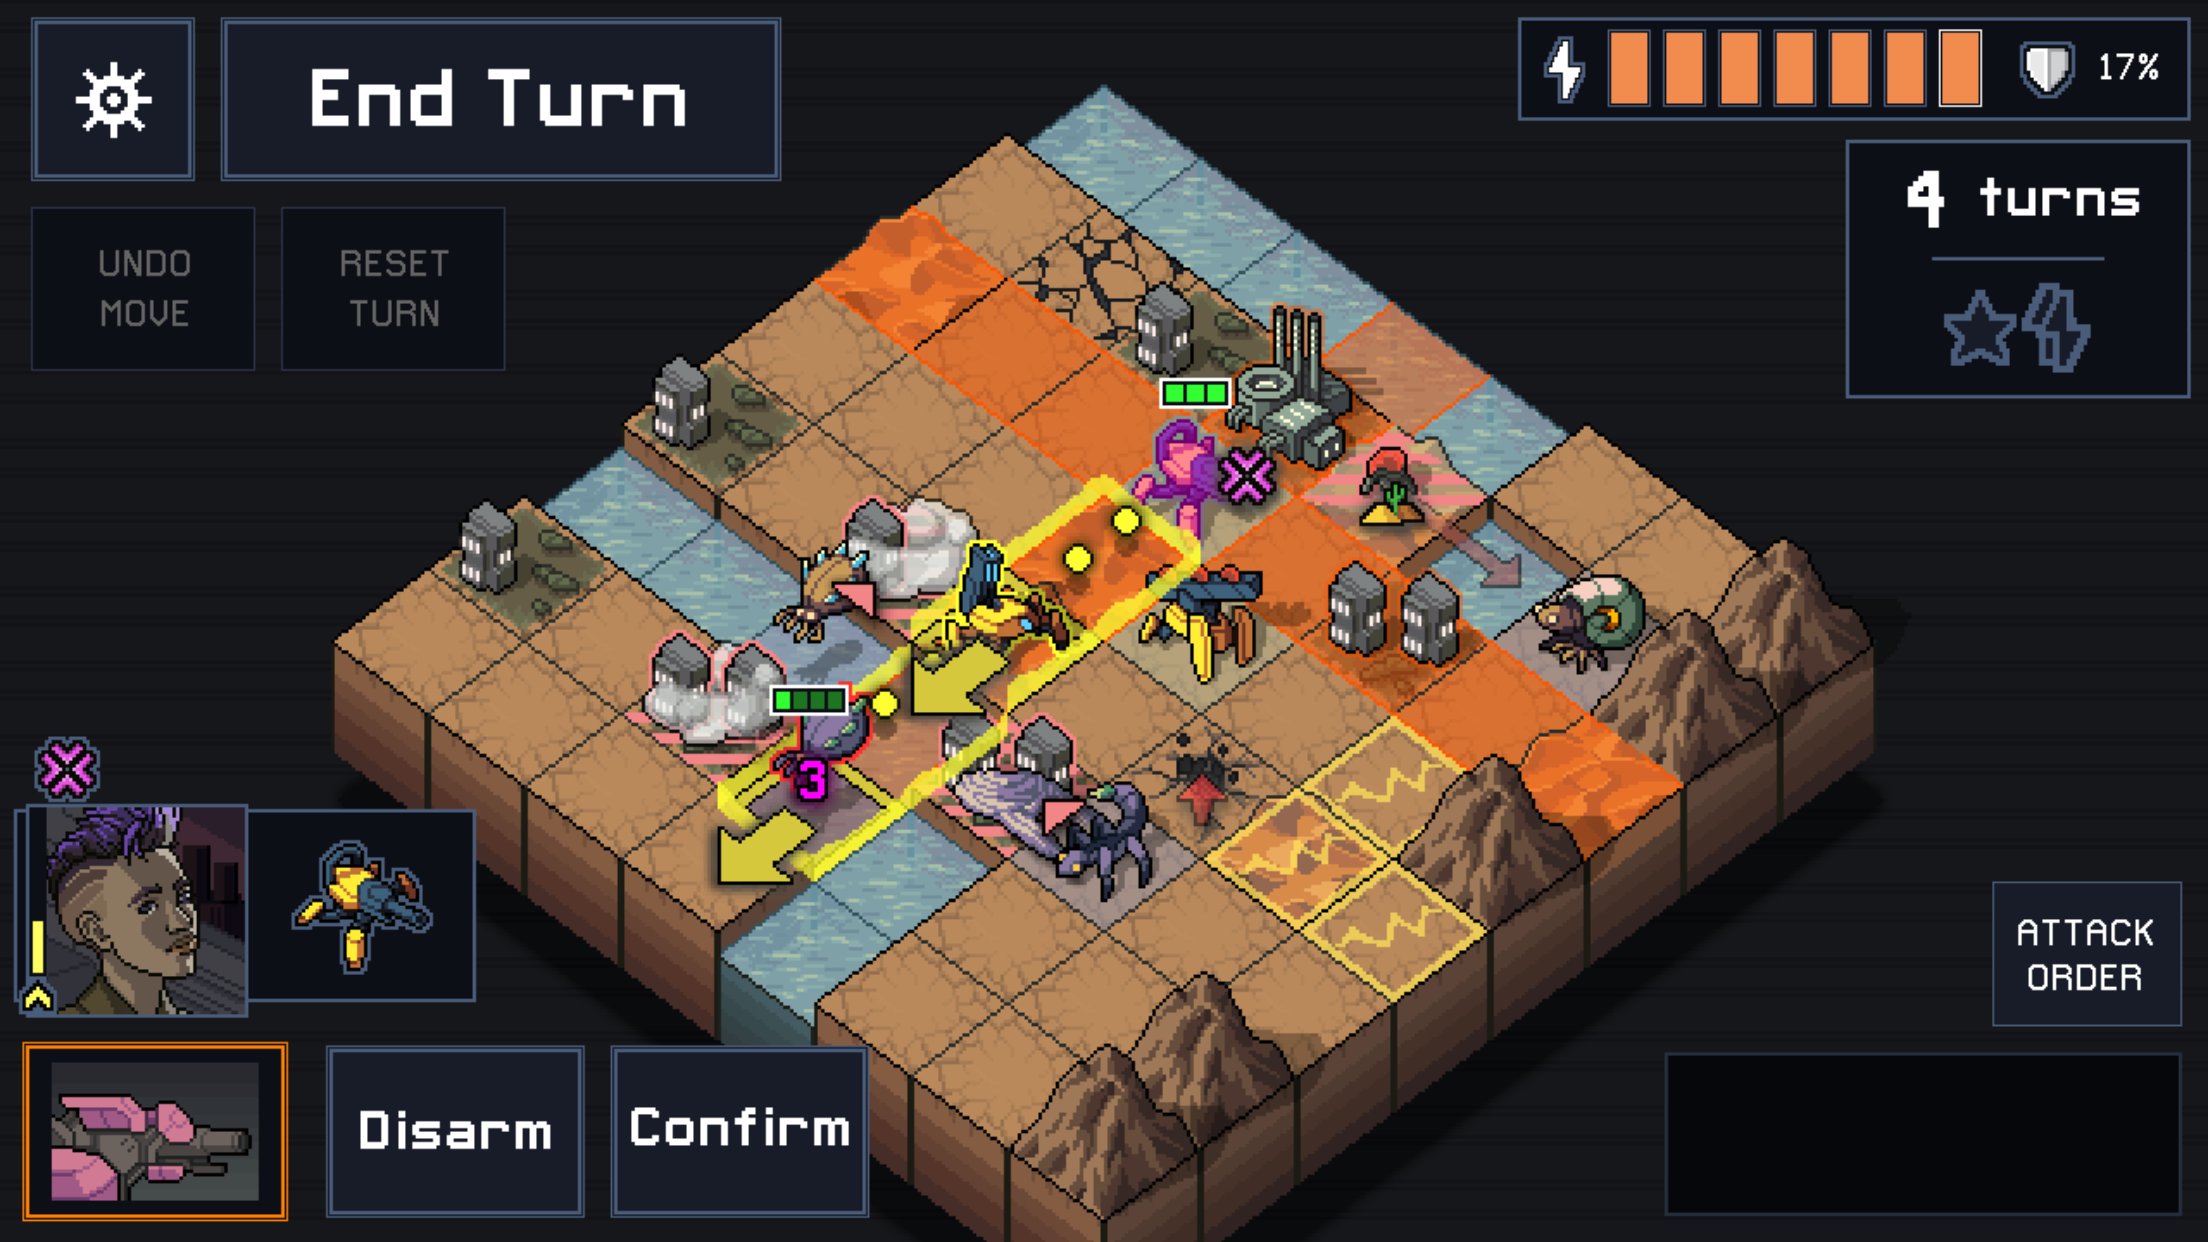 ‘Into the Breach’, from the Makers of ‘FTL’, Finally Coming to Mobile as Part of Netflix Games